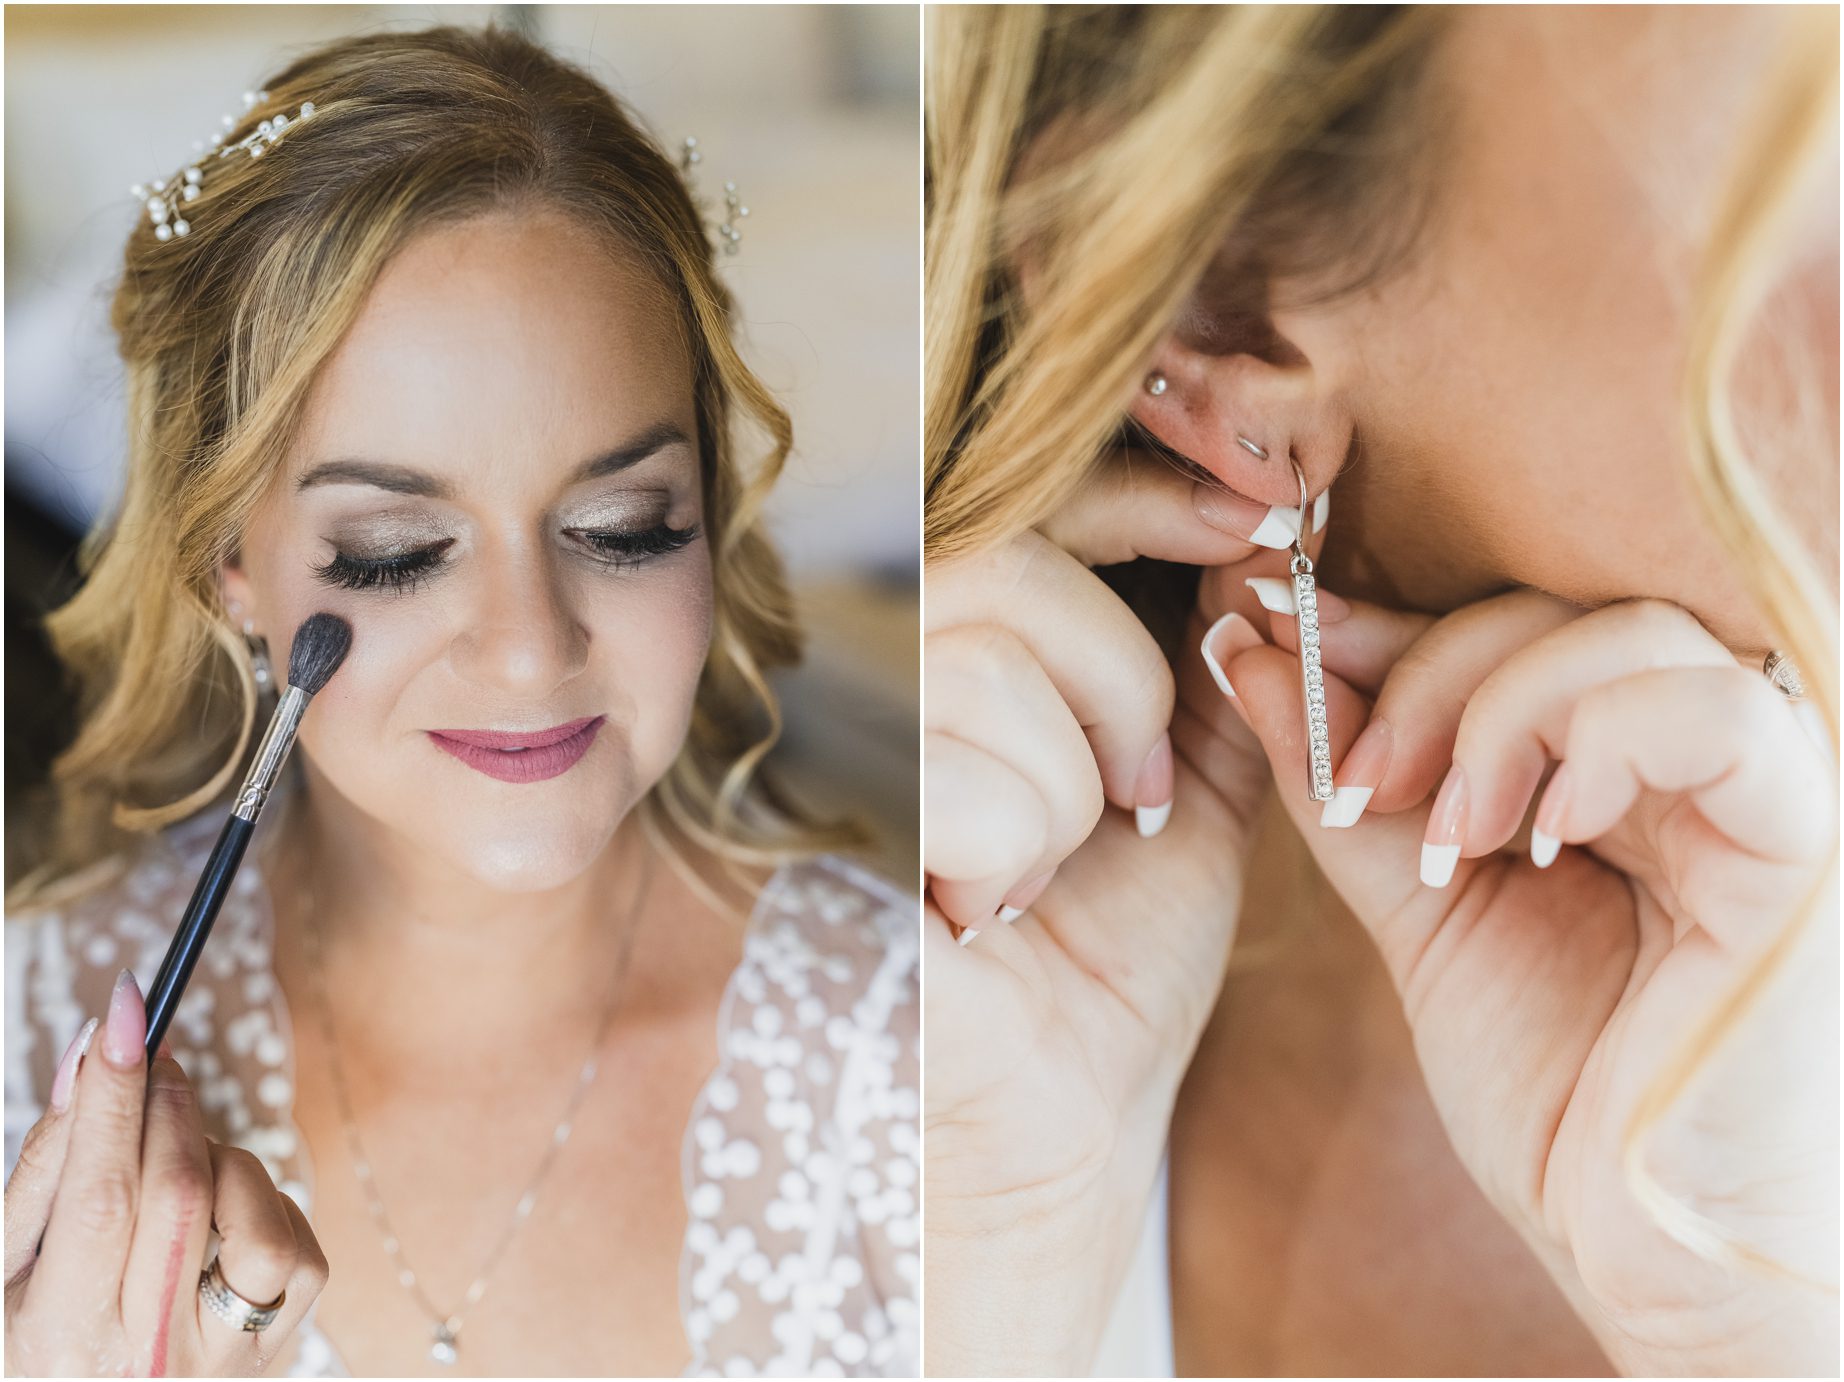 A bride gets ready for her Malibu West Beach club wedding by putting on makeup and earrings